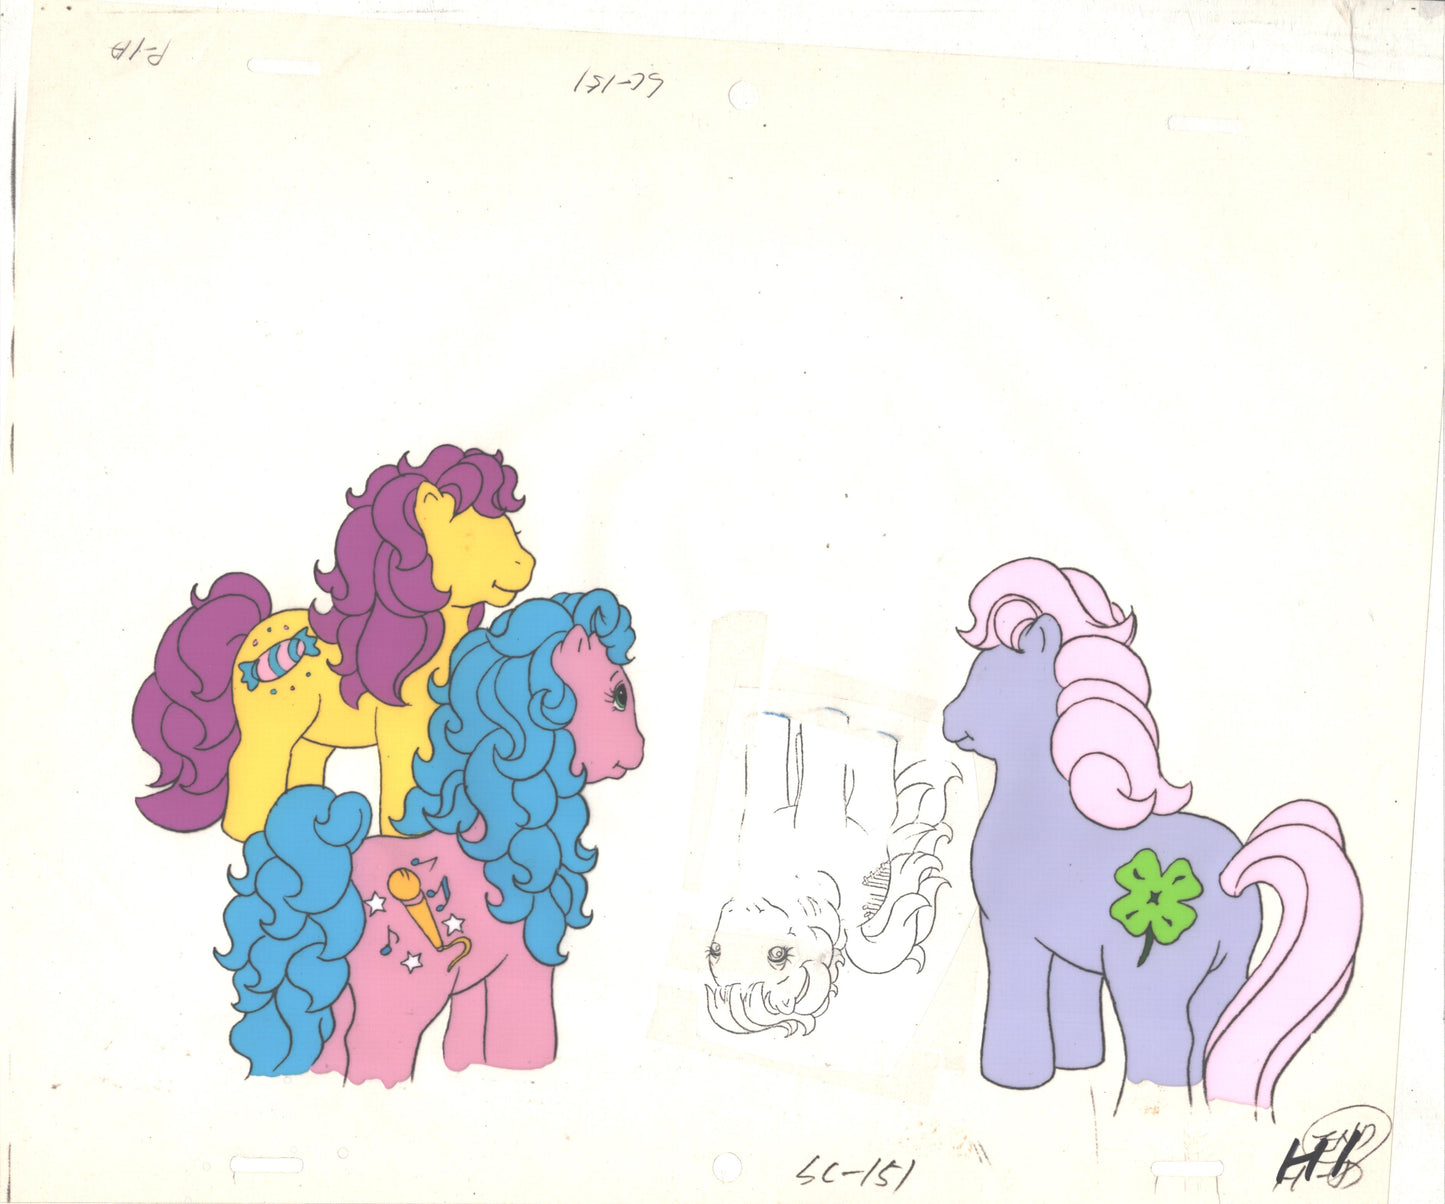 My Little Pony Original Production Animation Cel Hasbro Sunbow 1980s or 90s Used to Make the Cartoon J-H1